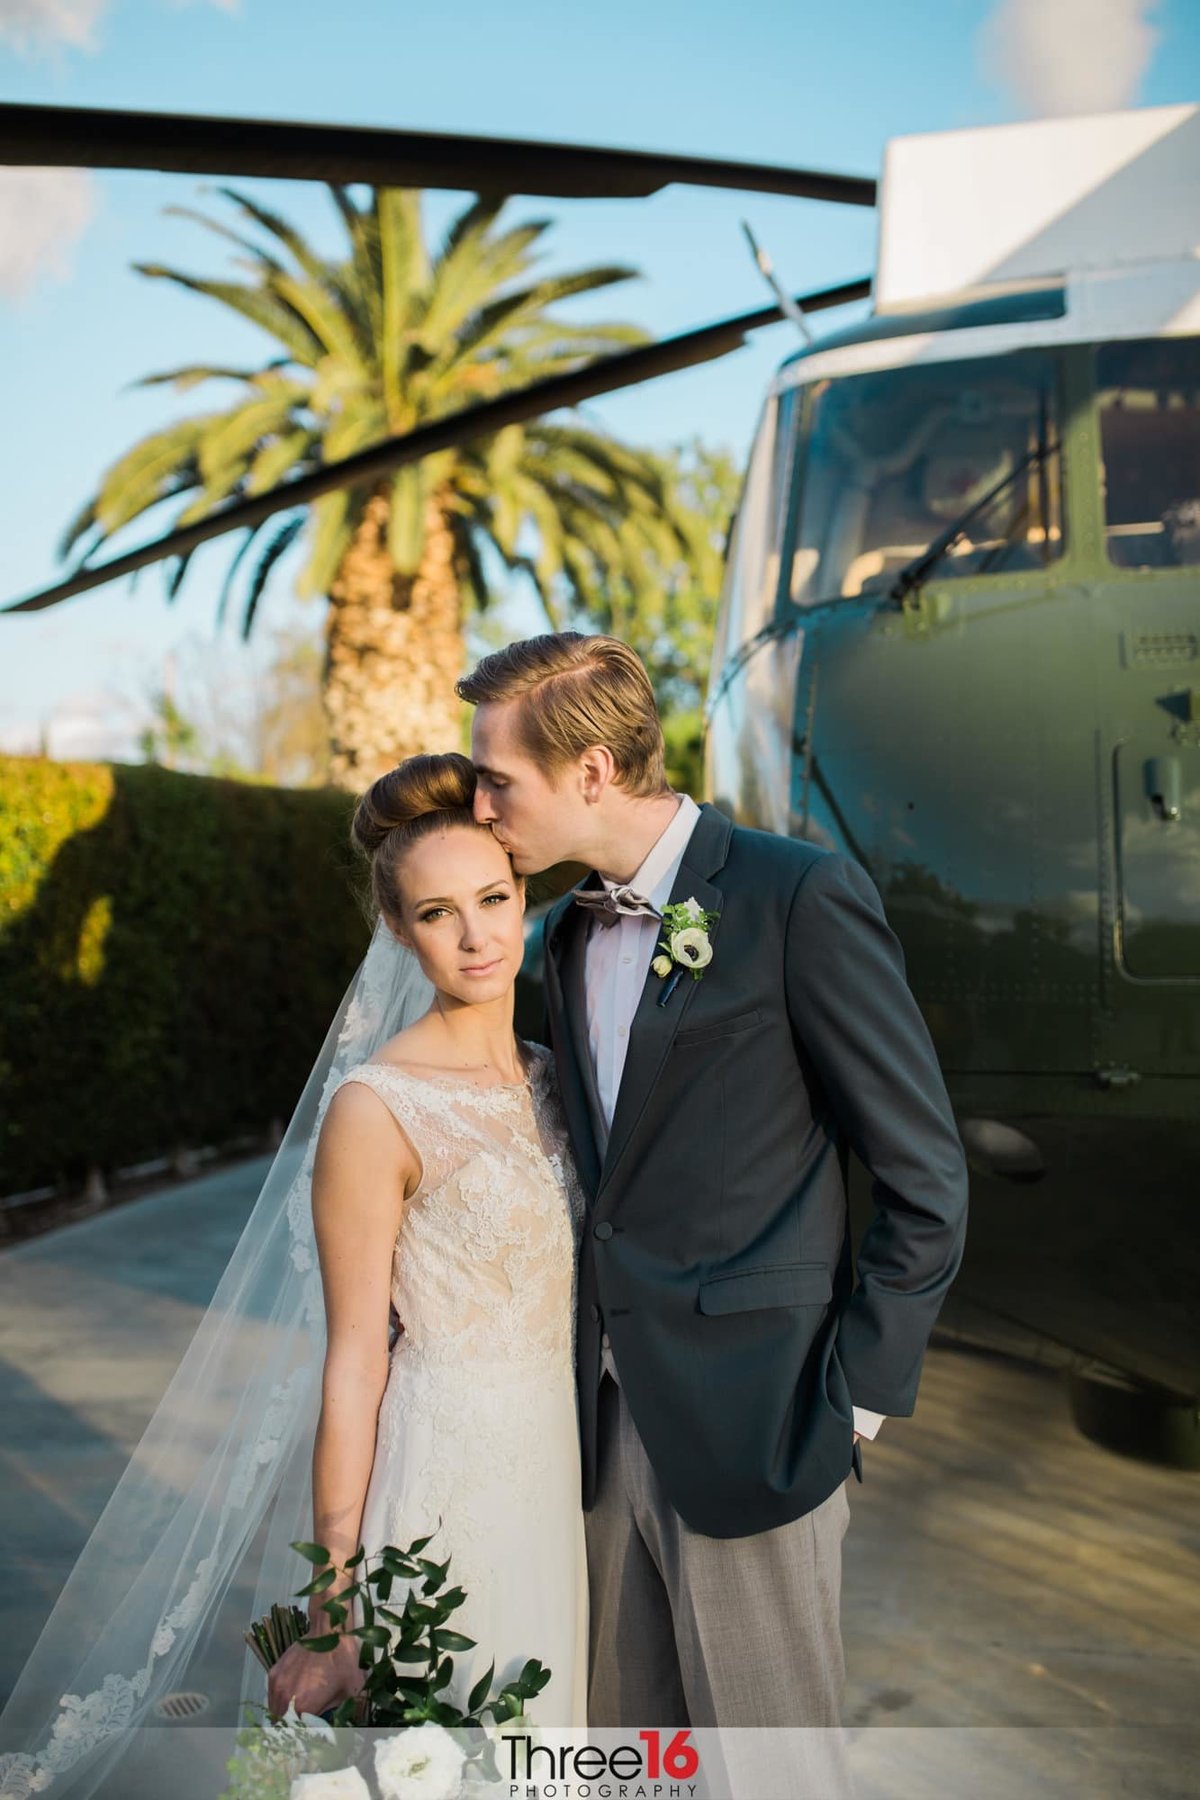 Groom kisses the side of his Bride's head as he embraces her from the side as they stand in front of the Army One helicopter on the grounds of the Richard Nixon Library in Yorba Linda